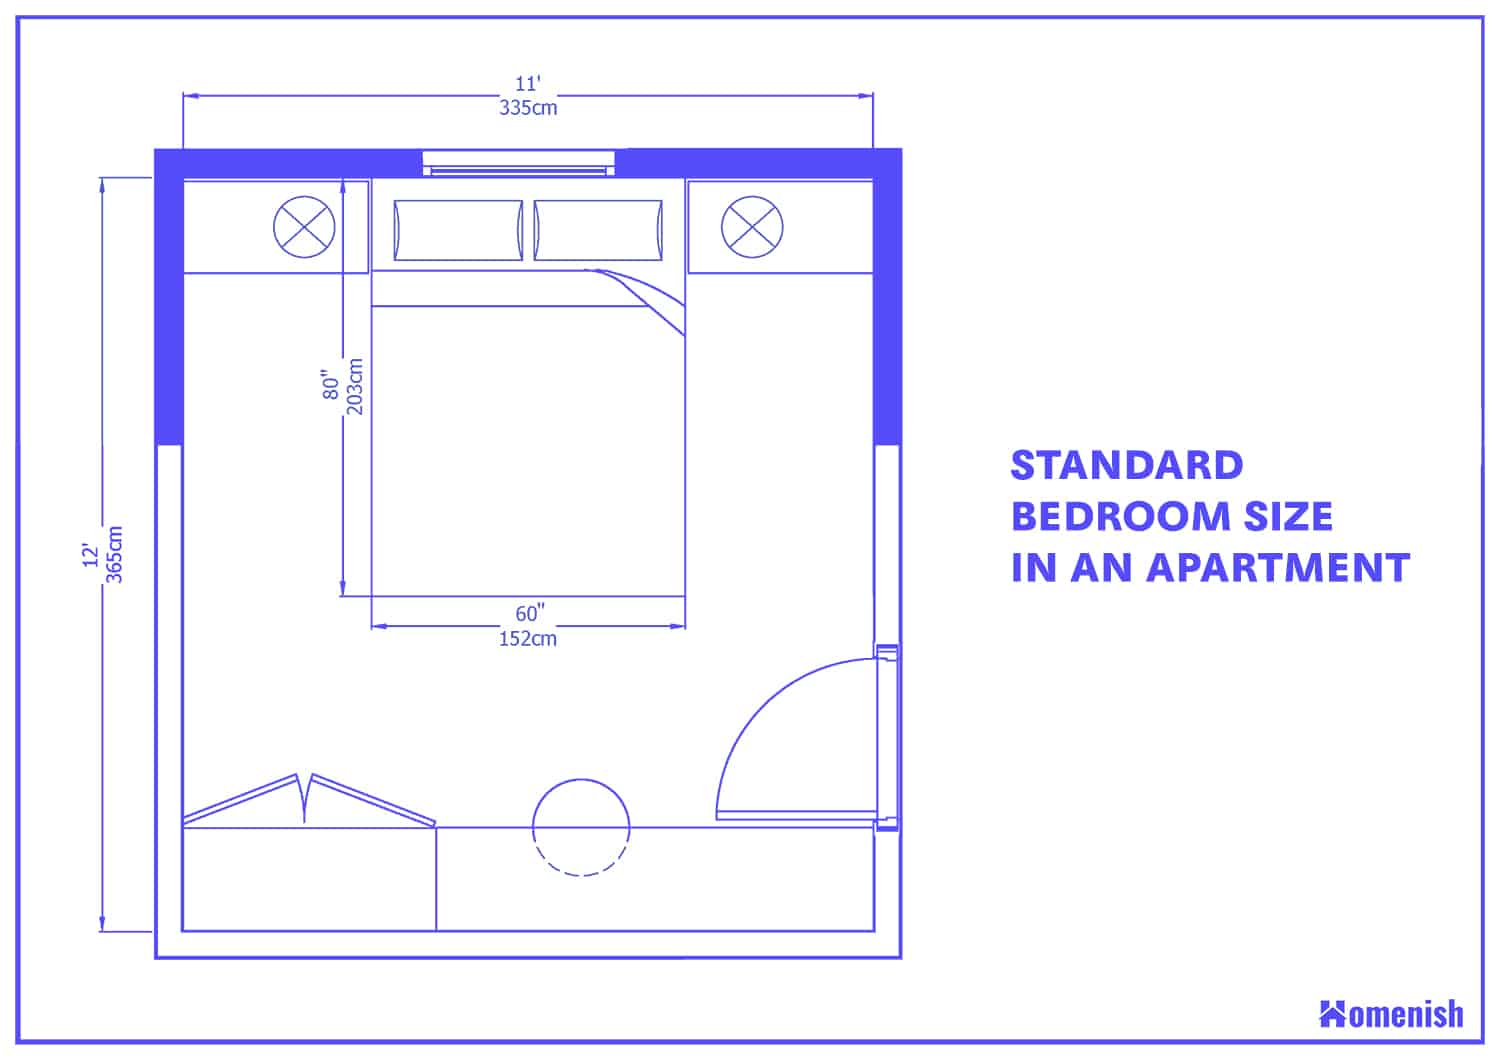 Standard Bedroom Size in an Apartment